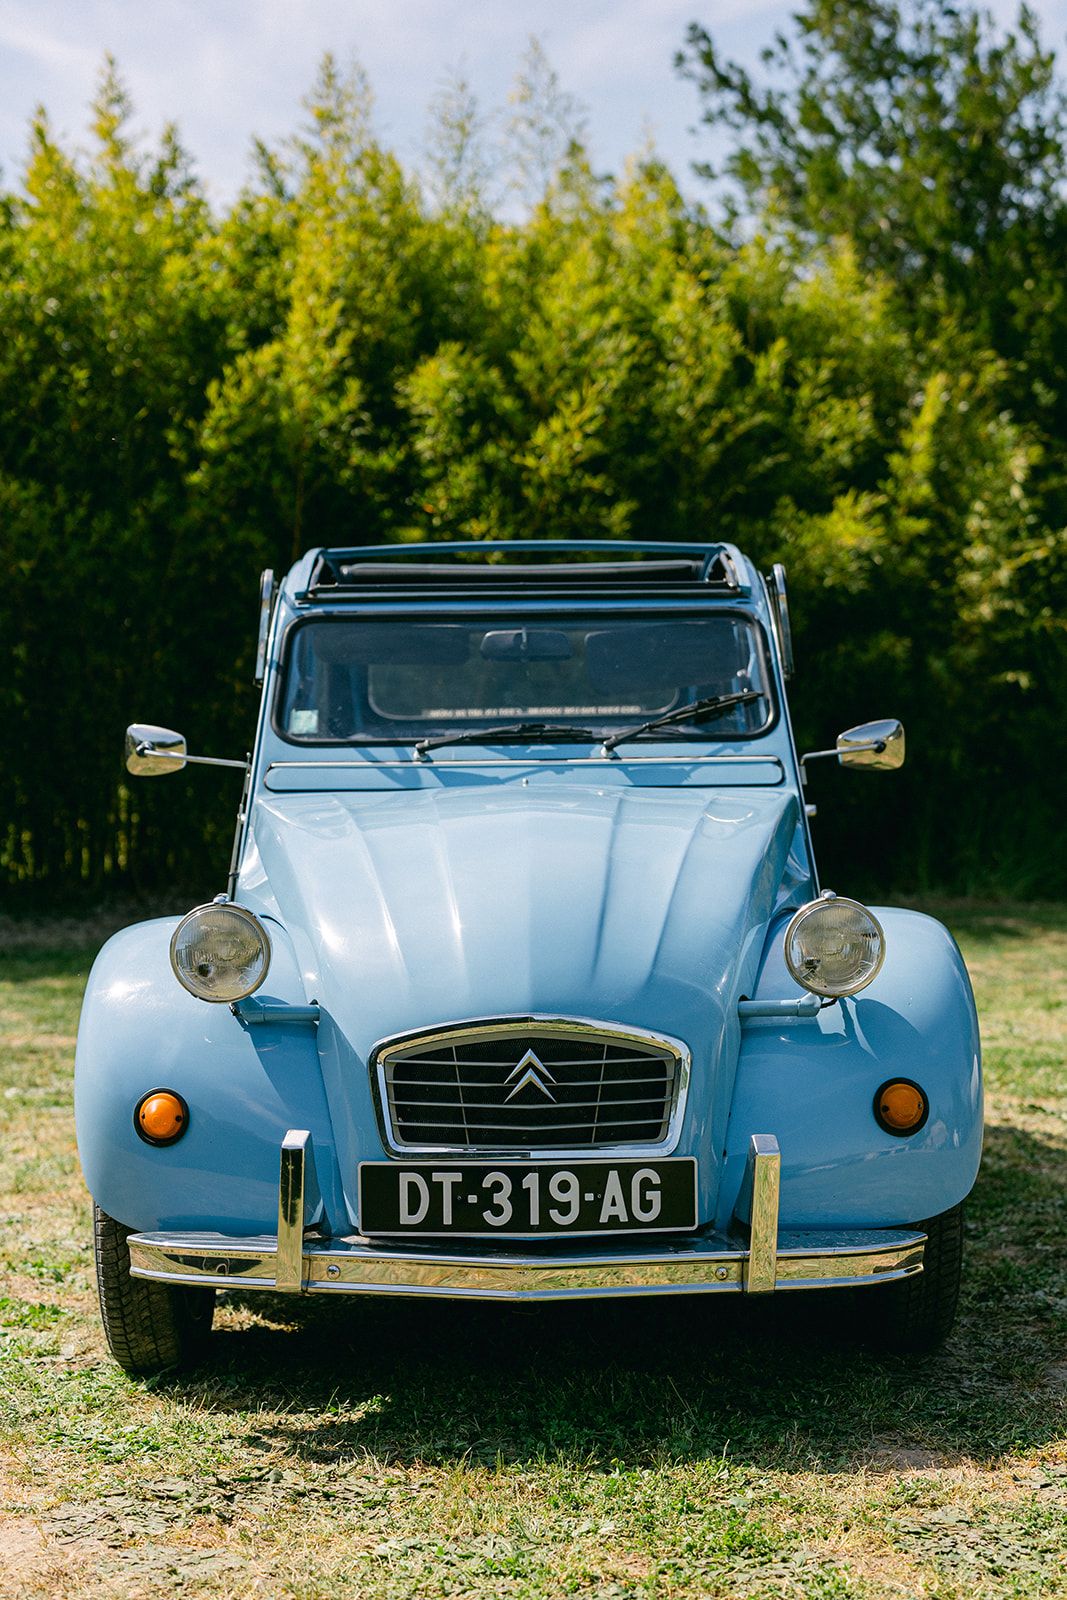 A view of the Provence Classics 1985 2CV